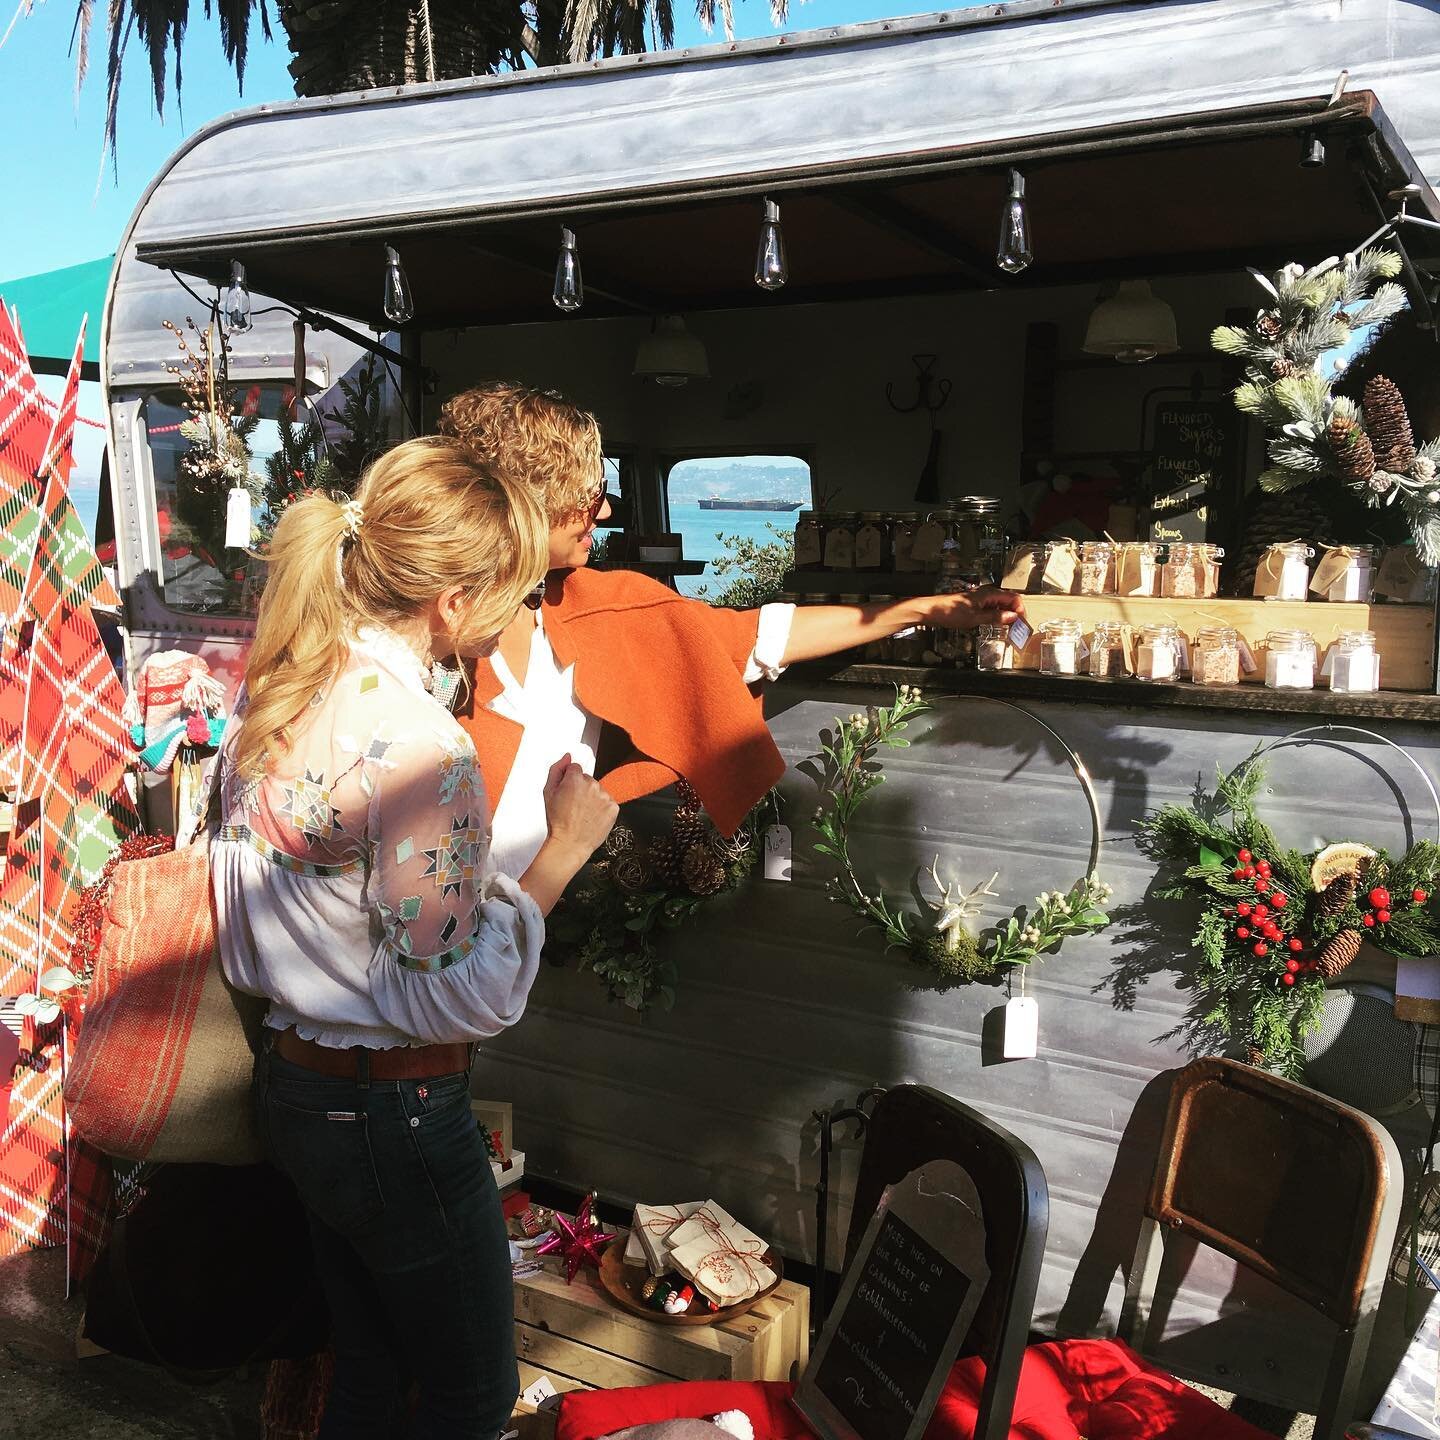 It was SO busy, beautiful, and fun yesterday at the LAST #treasurefestsf !!! Come visit us today in the &lsquo;Lil Lo - we&rsquo;re making culinary salts and have all sorts of holiday decor, new and vintage fun.